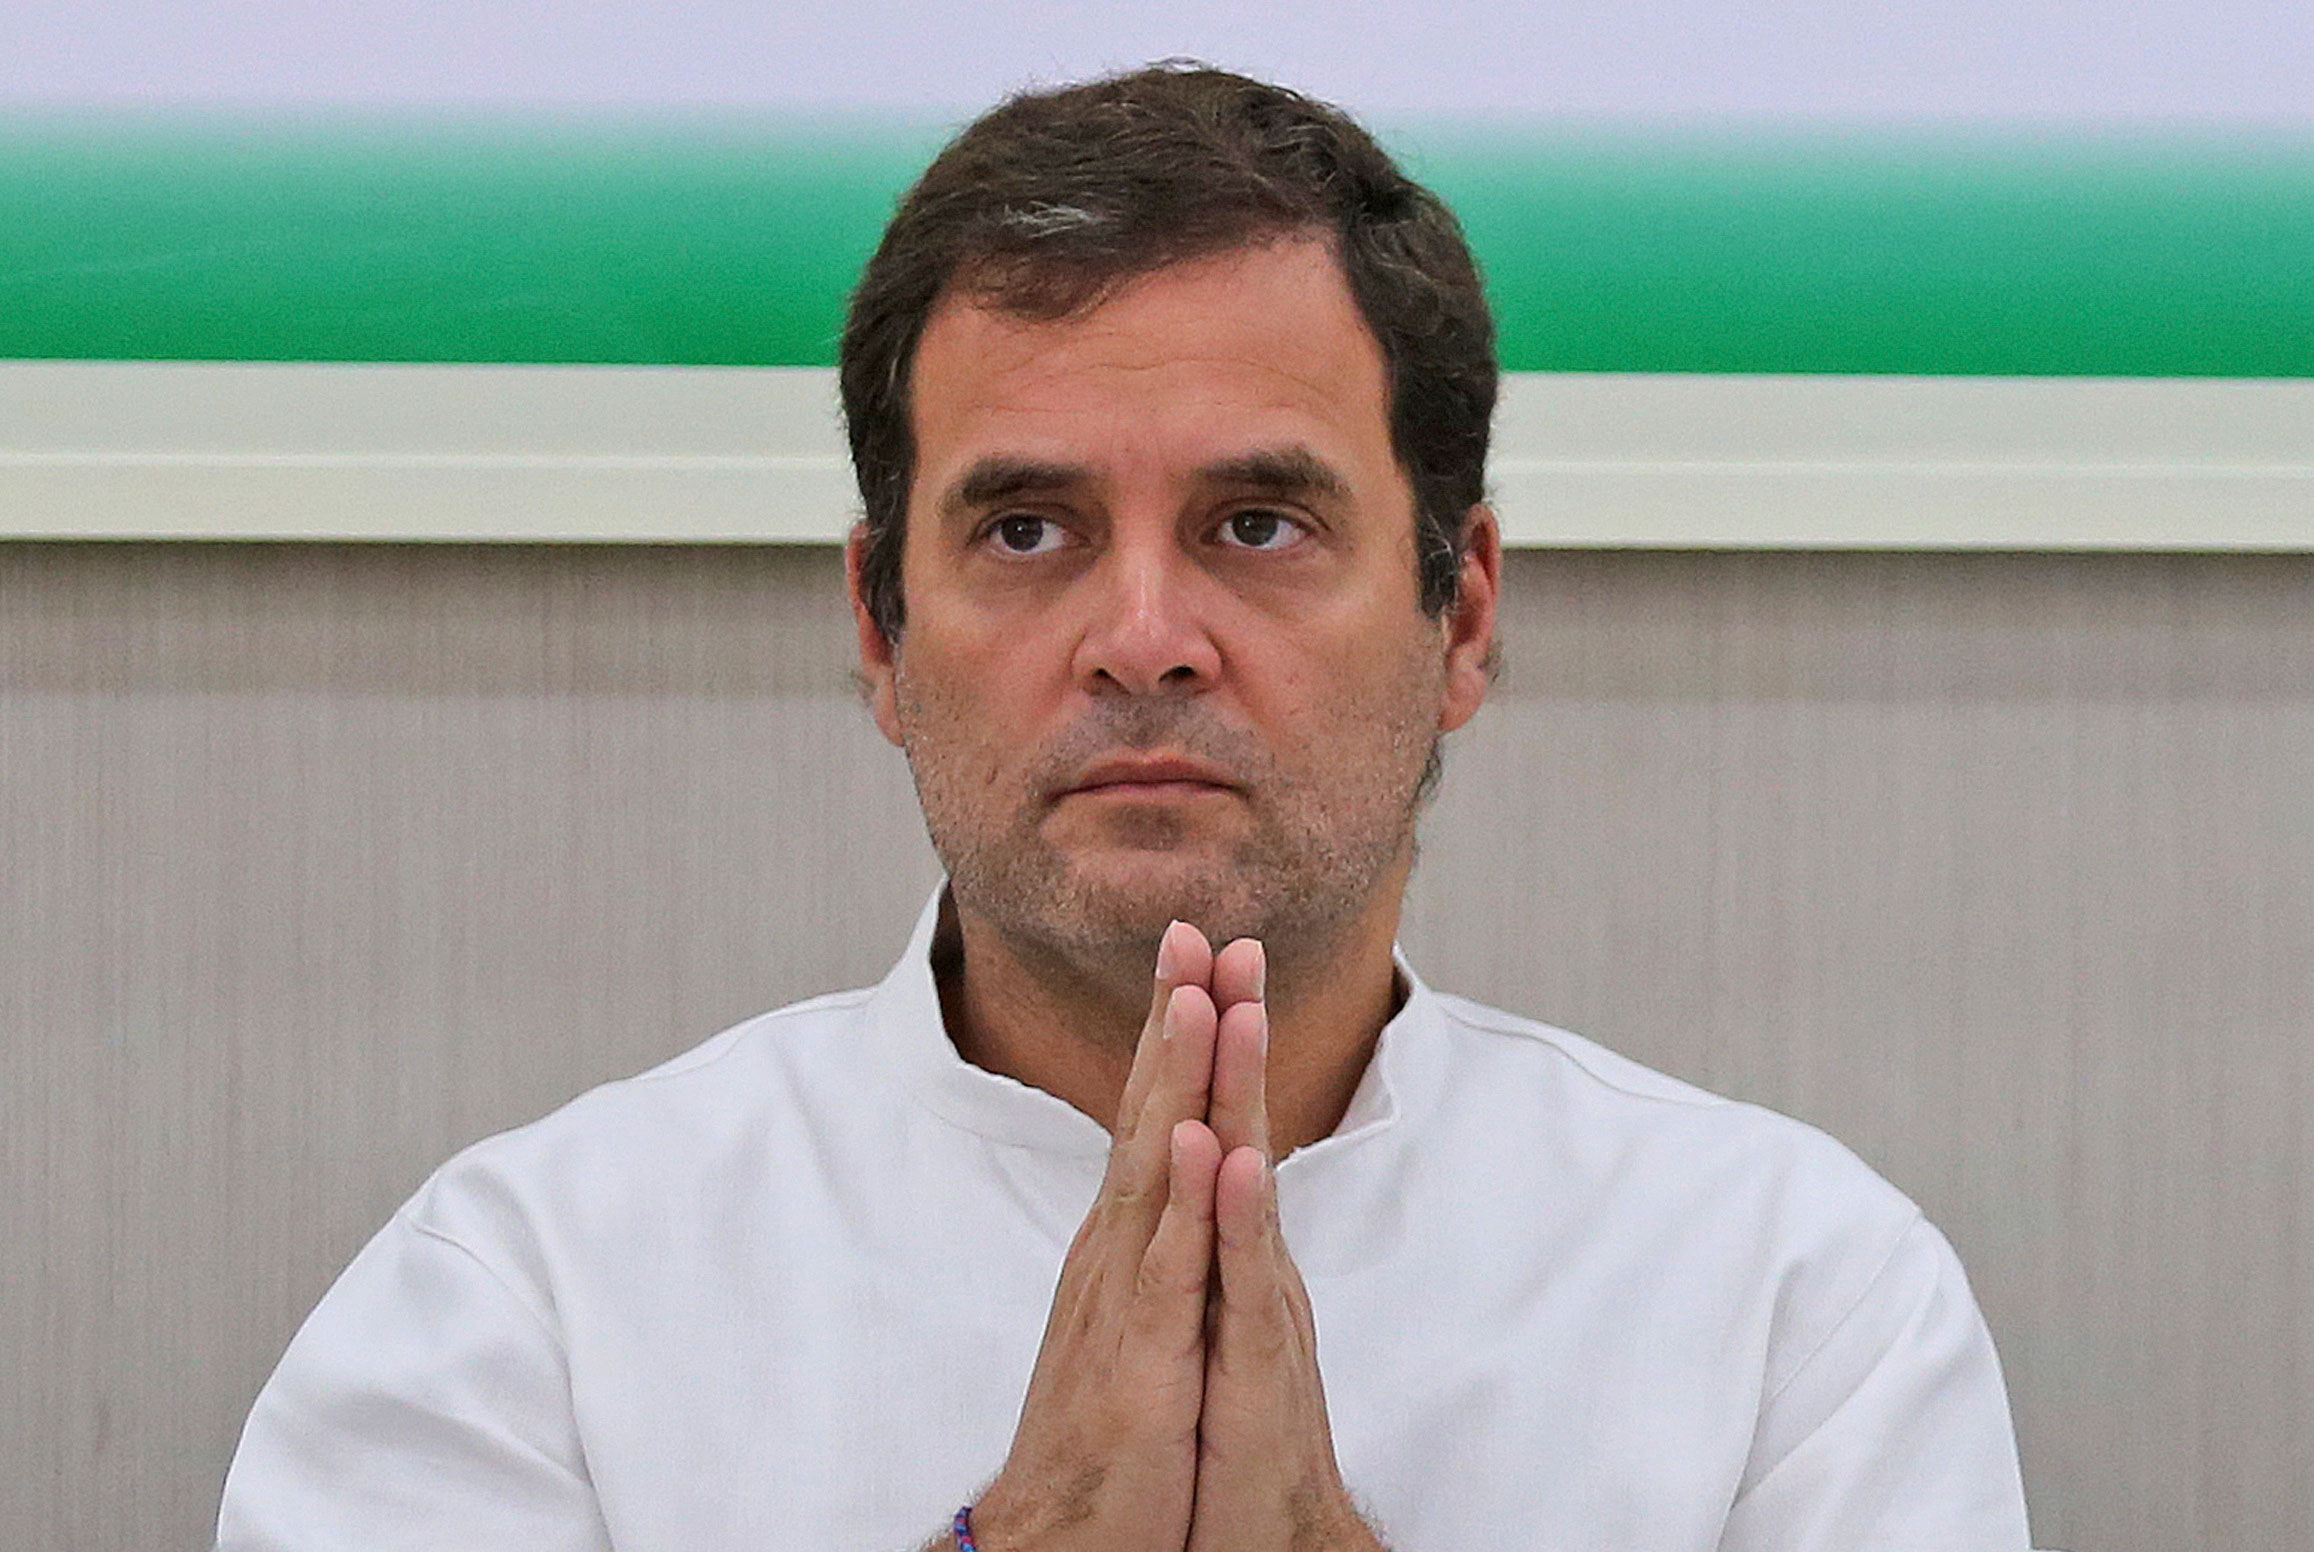 Rahul Gandhi tweeted: “Prime Minister & Finance Minister are clueless about how to solve their self-created economic disaster. Stealing from RBI won’t work -- it’s like stealing a Band-Aid from the dispensary & sticking it on a gunshot wound.”
